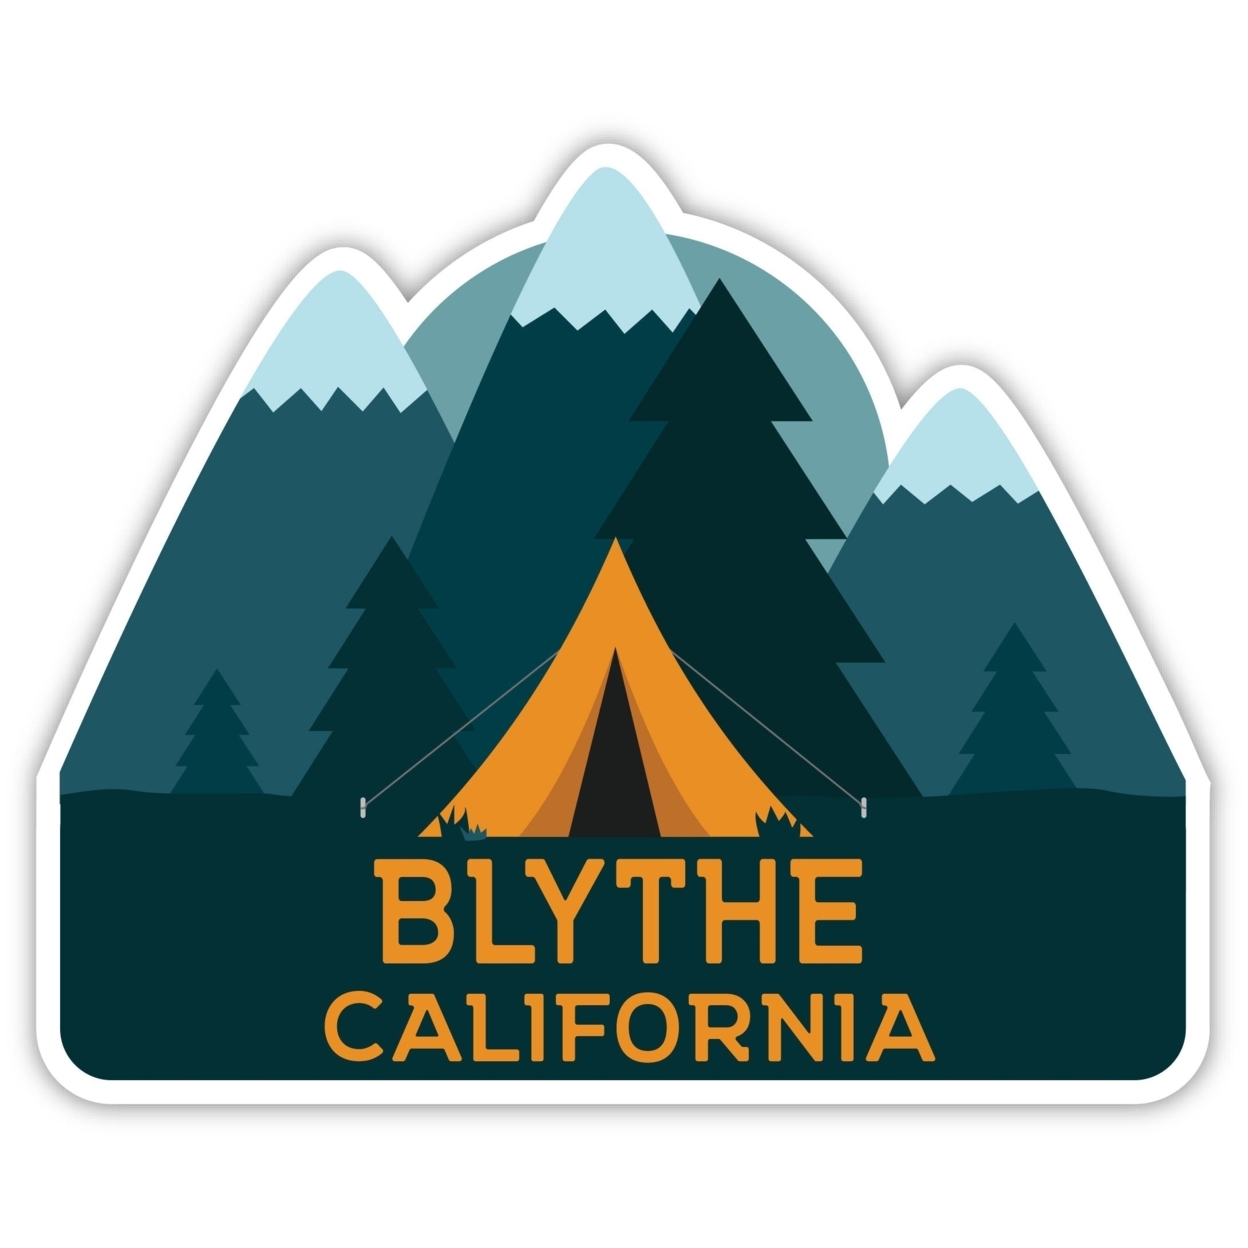 Blythe California Souvenir Decorative Stickers (Choose Theme And Size) - 4-Pack, 8-Inch, Tent